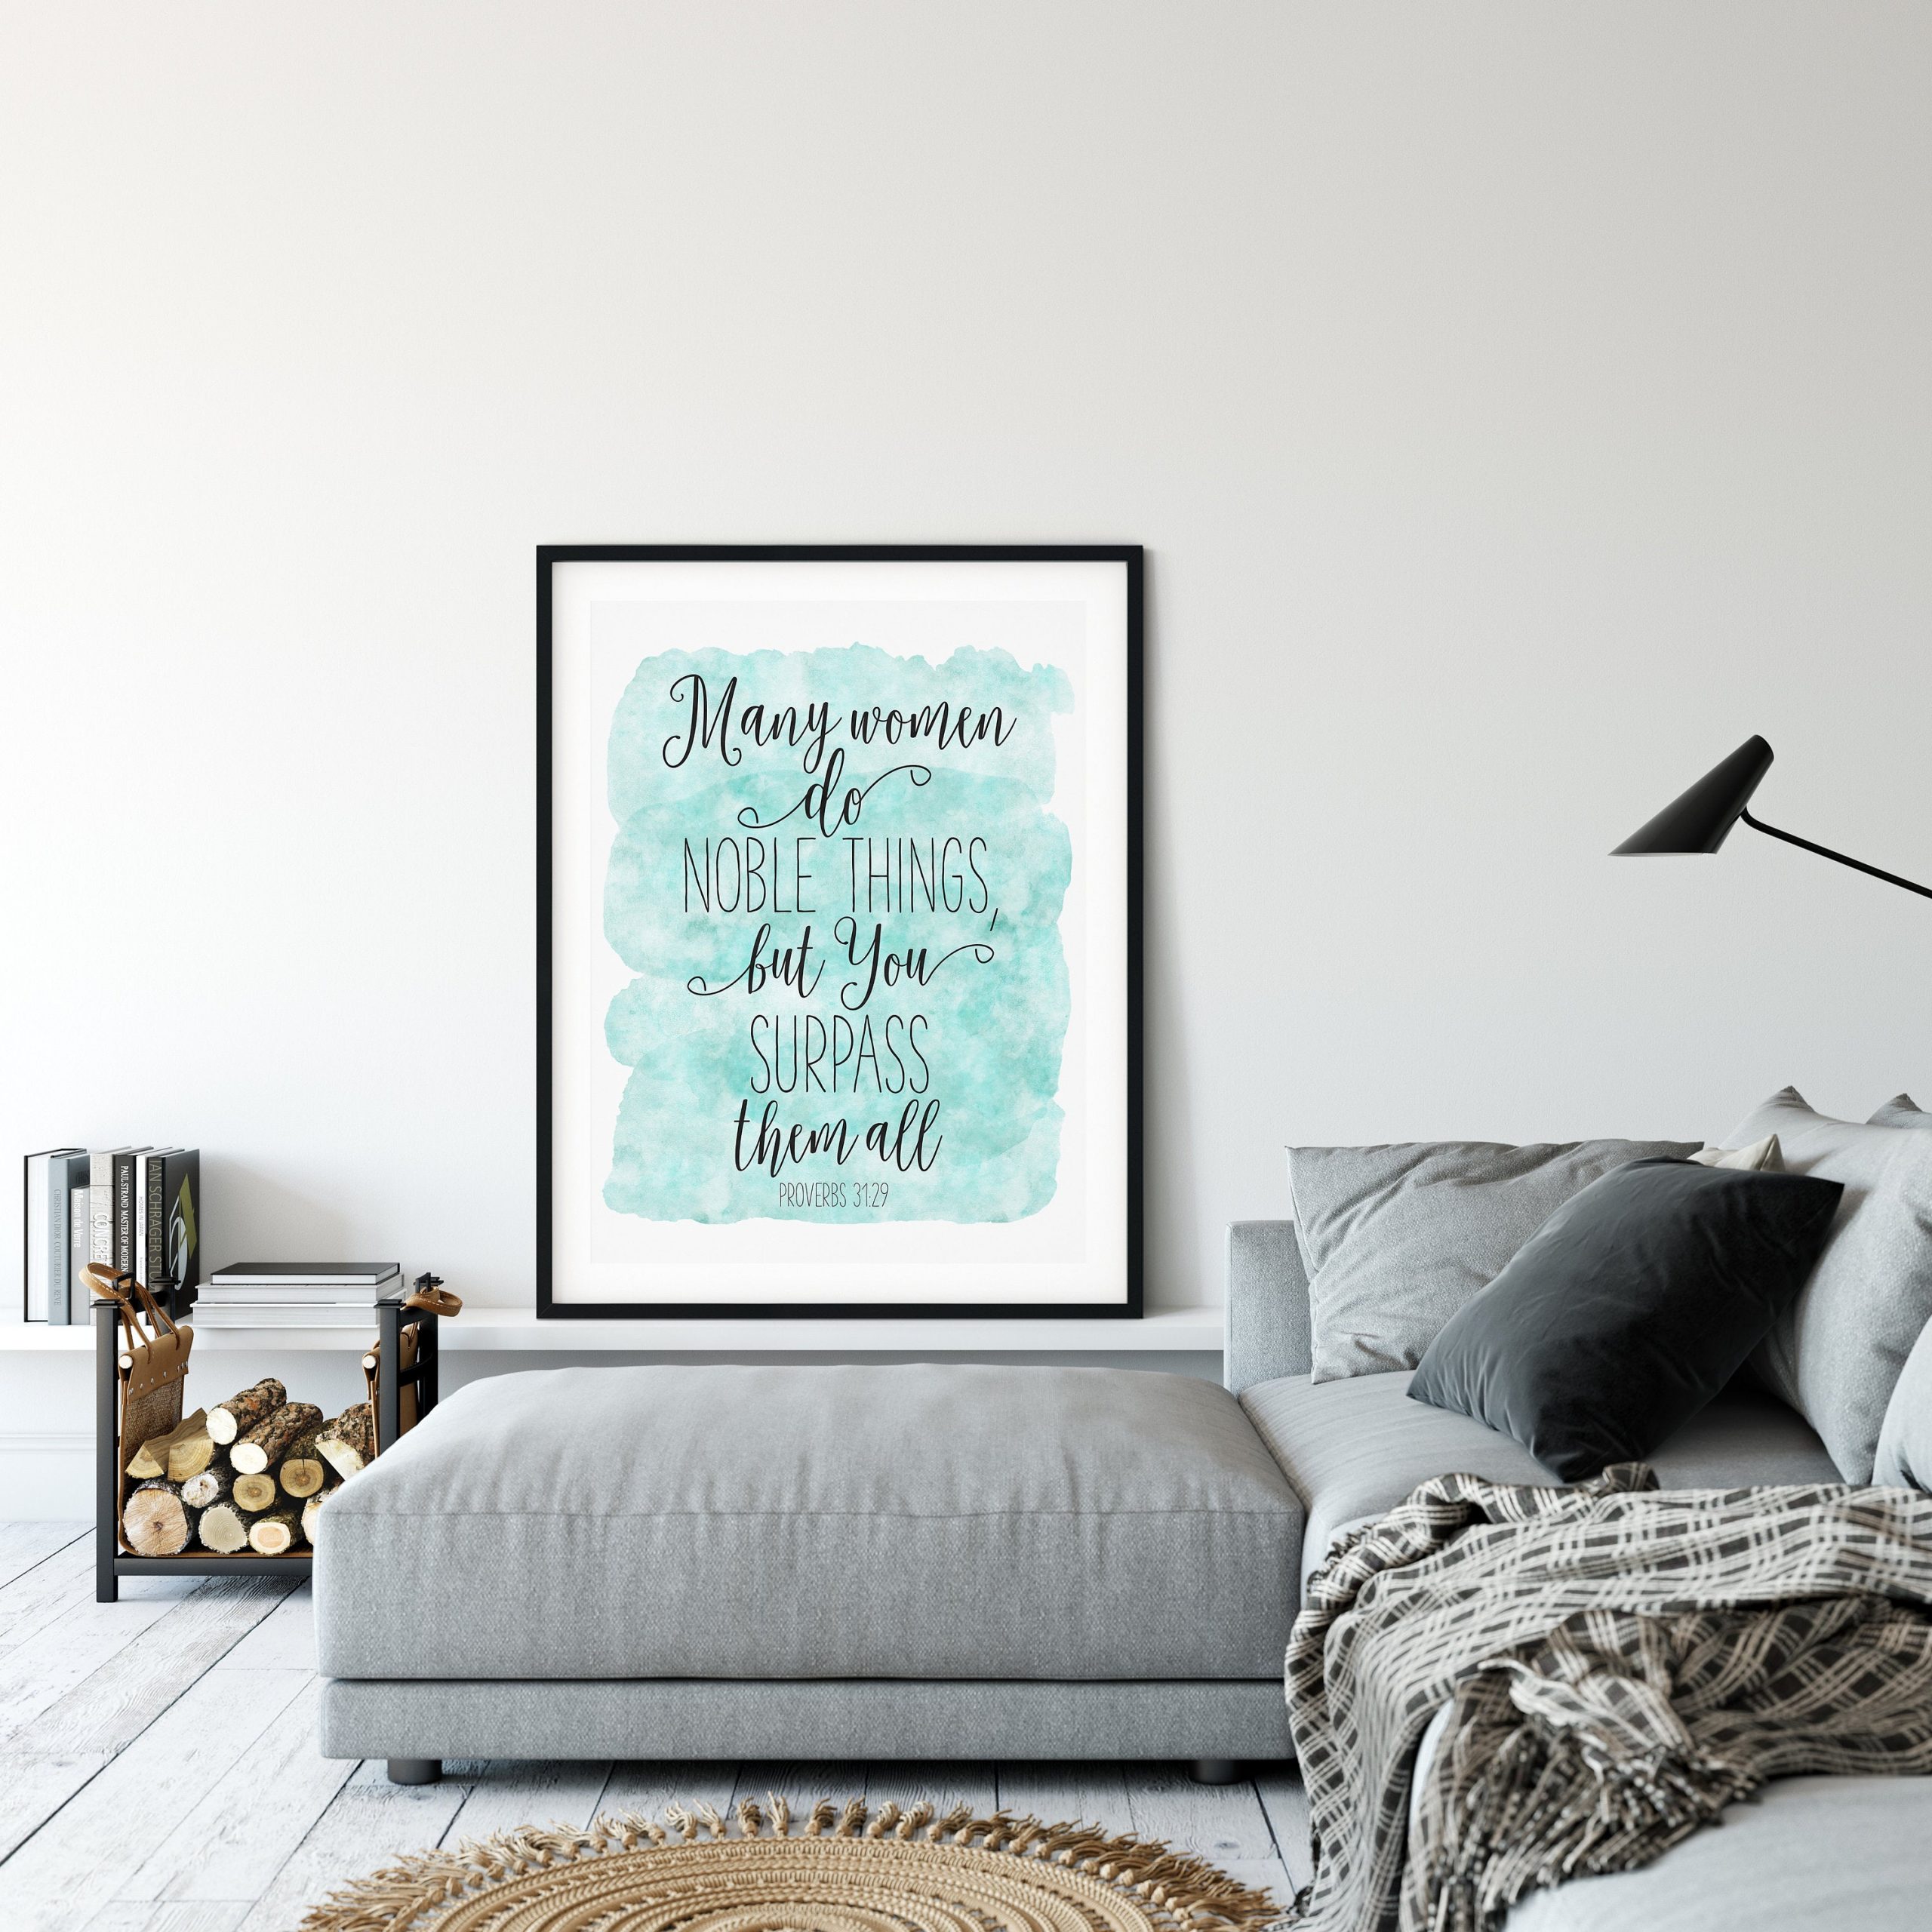 Many Women Do Noble Things, But You Surpass Them All, Proverbs 31:29, Bible Verse Prints